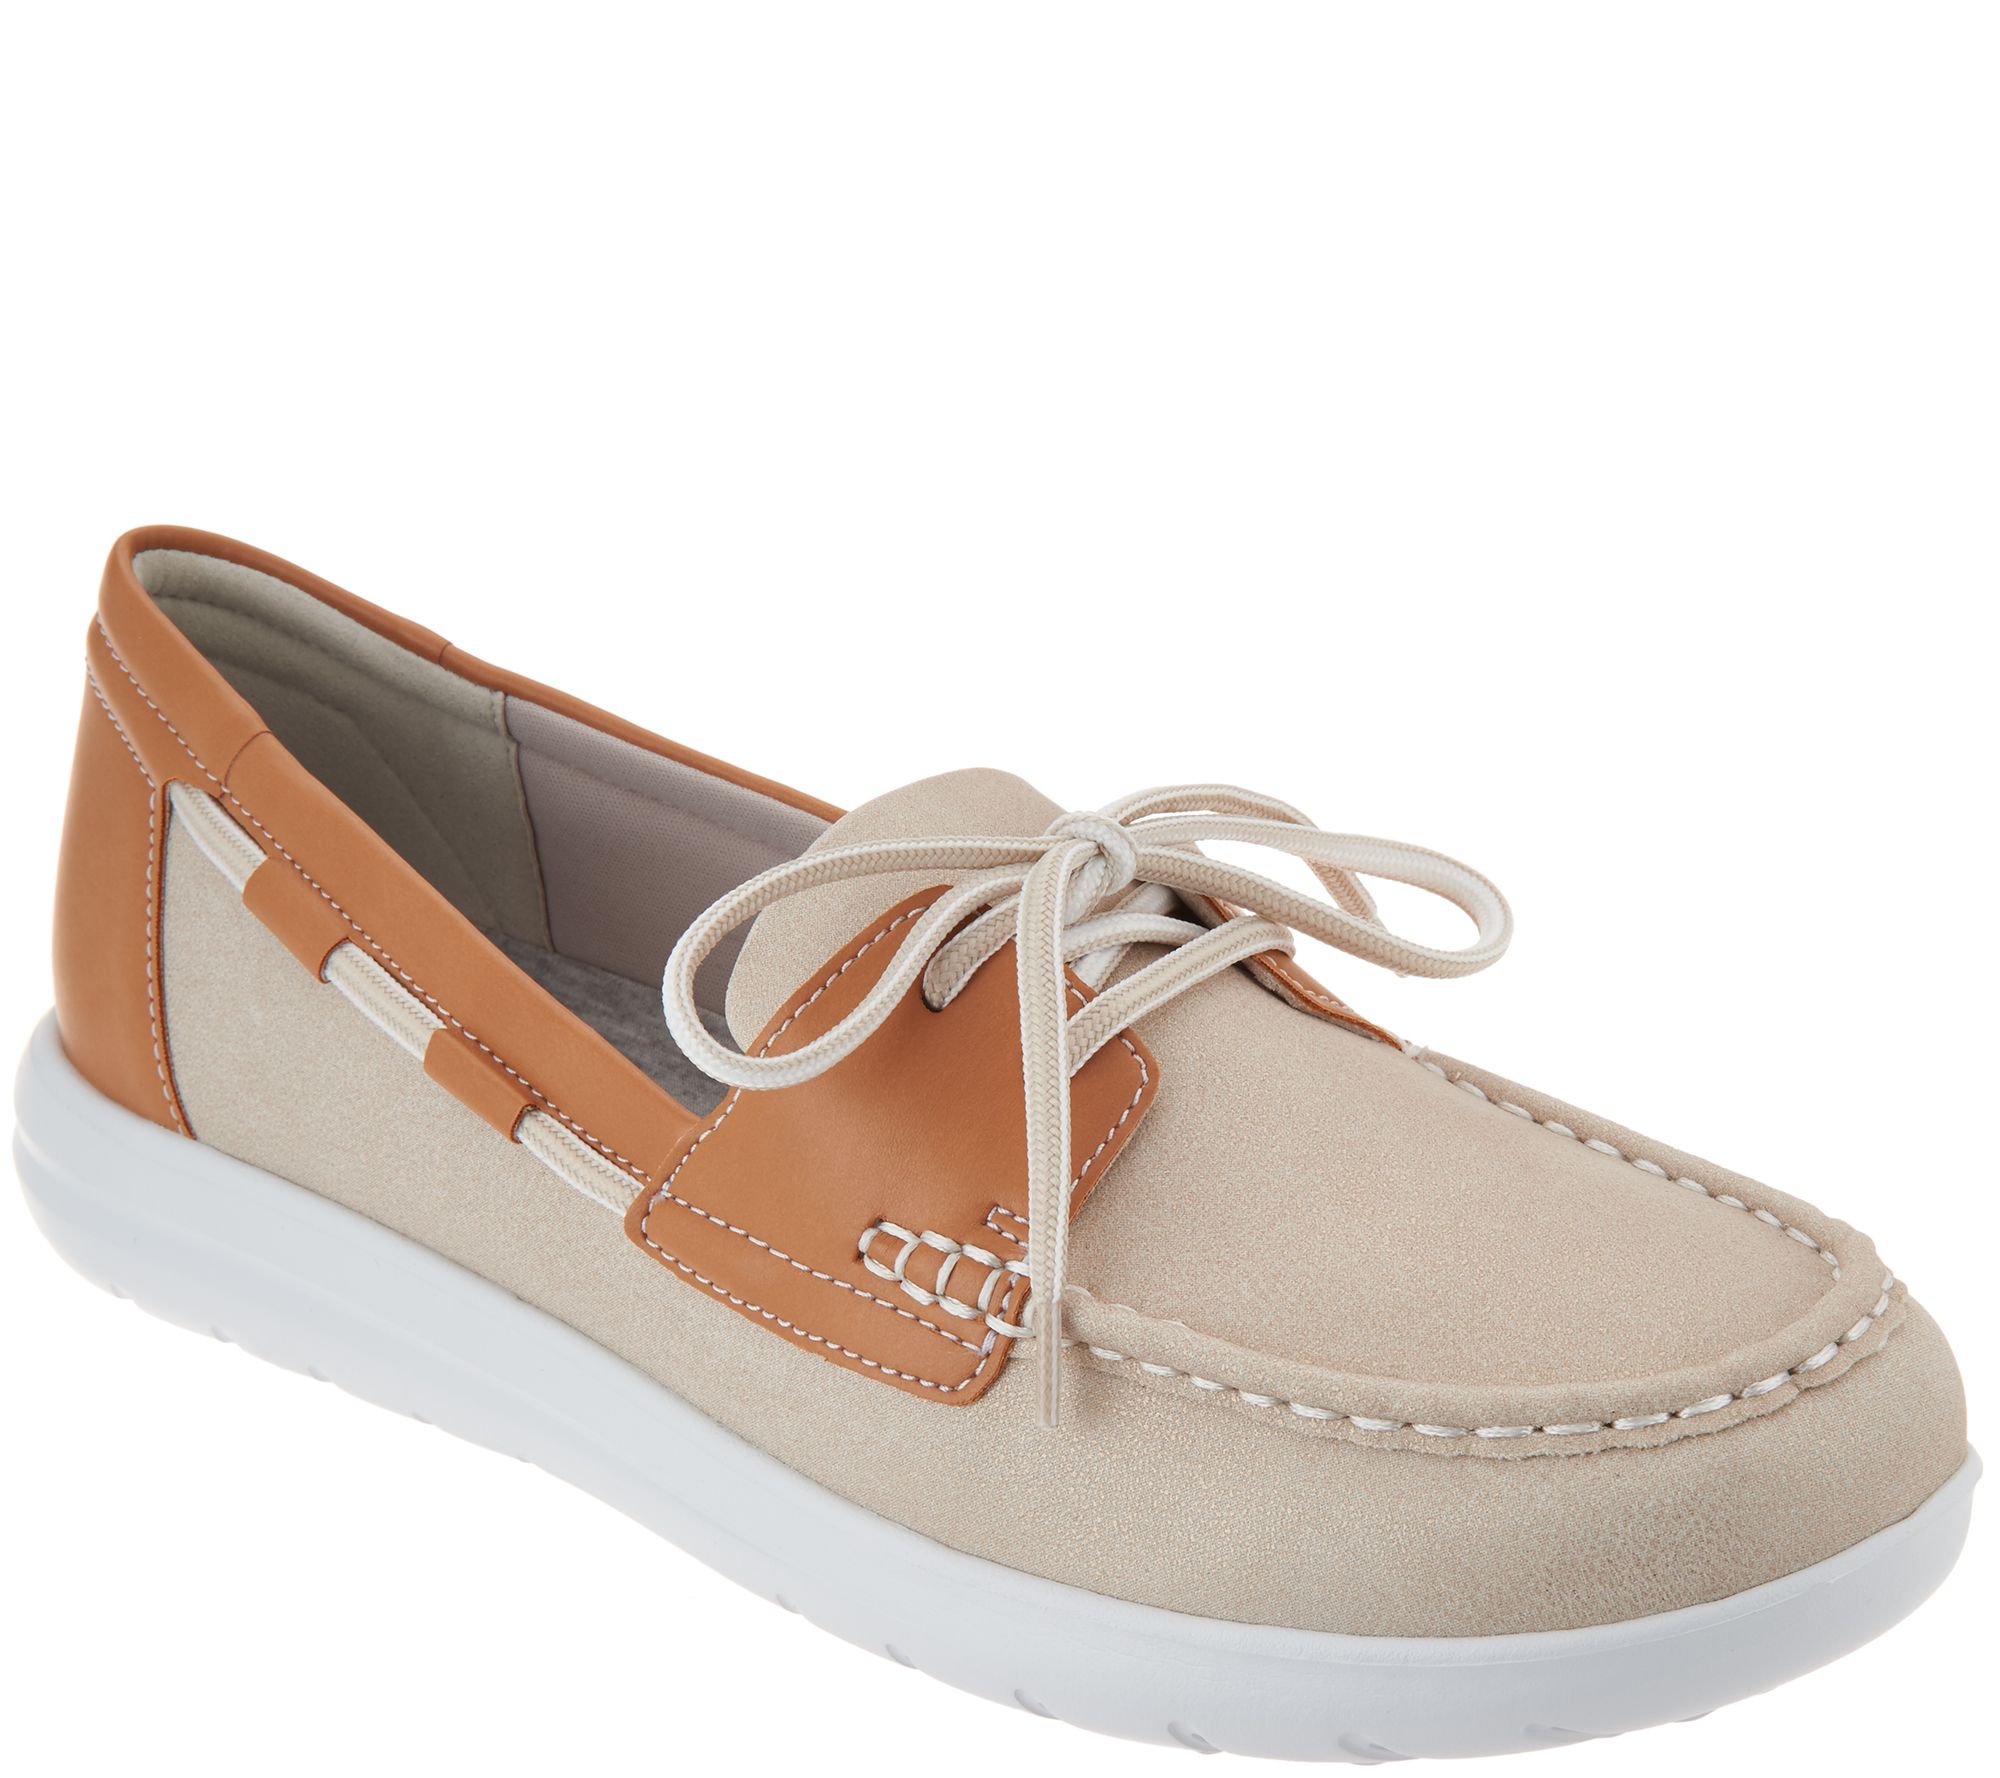 clarks cloudsteppers boat shoes